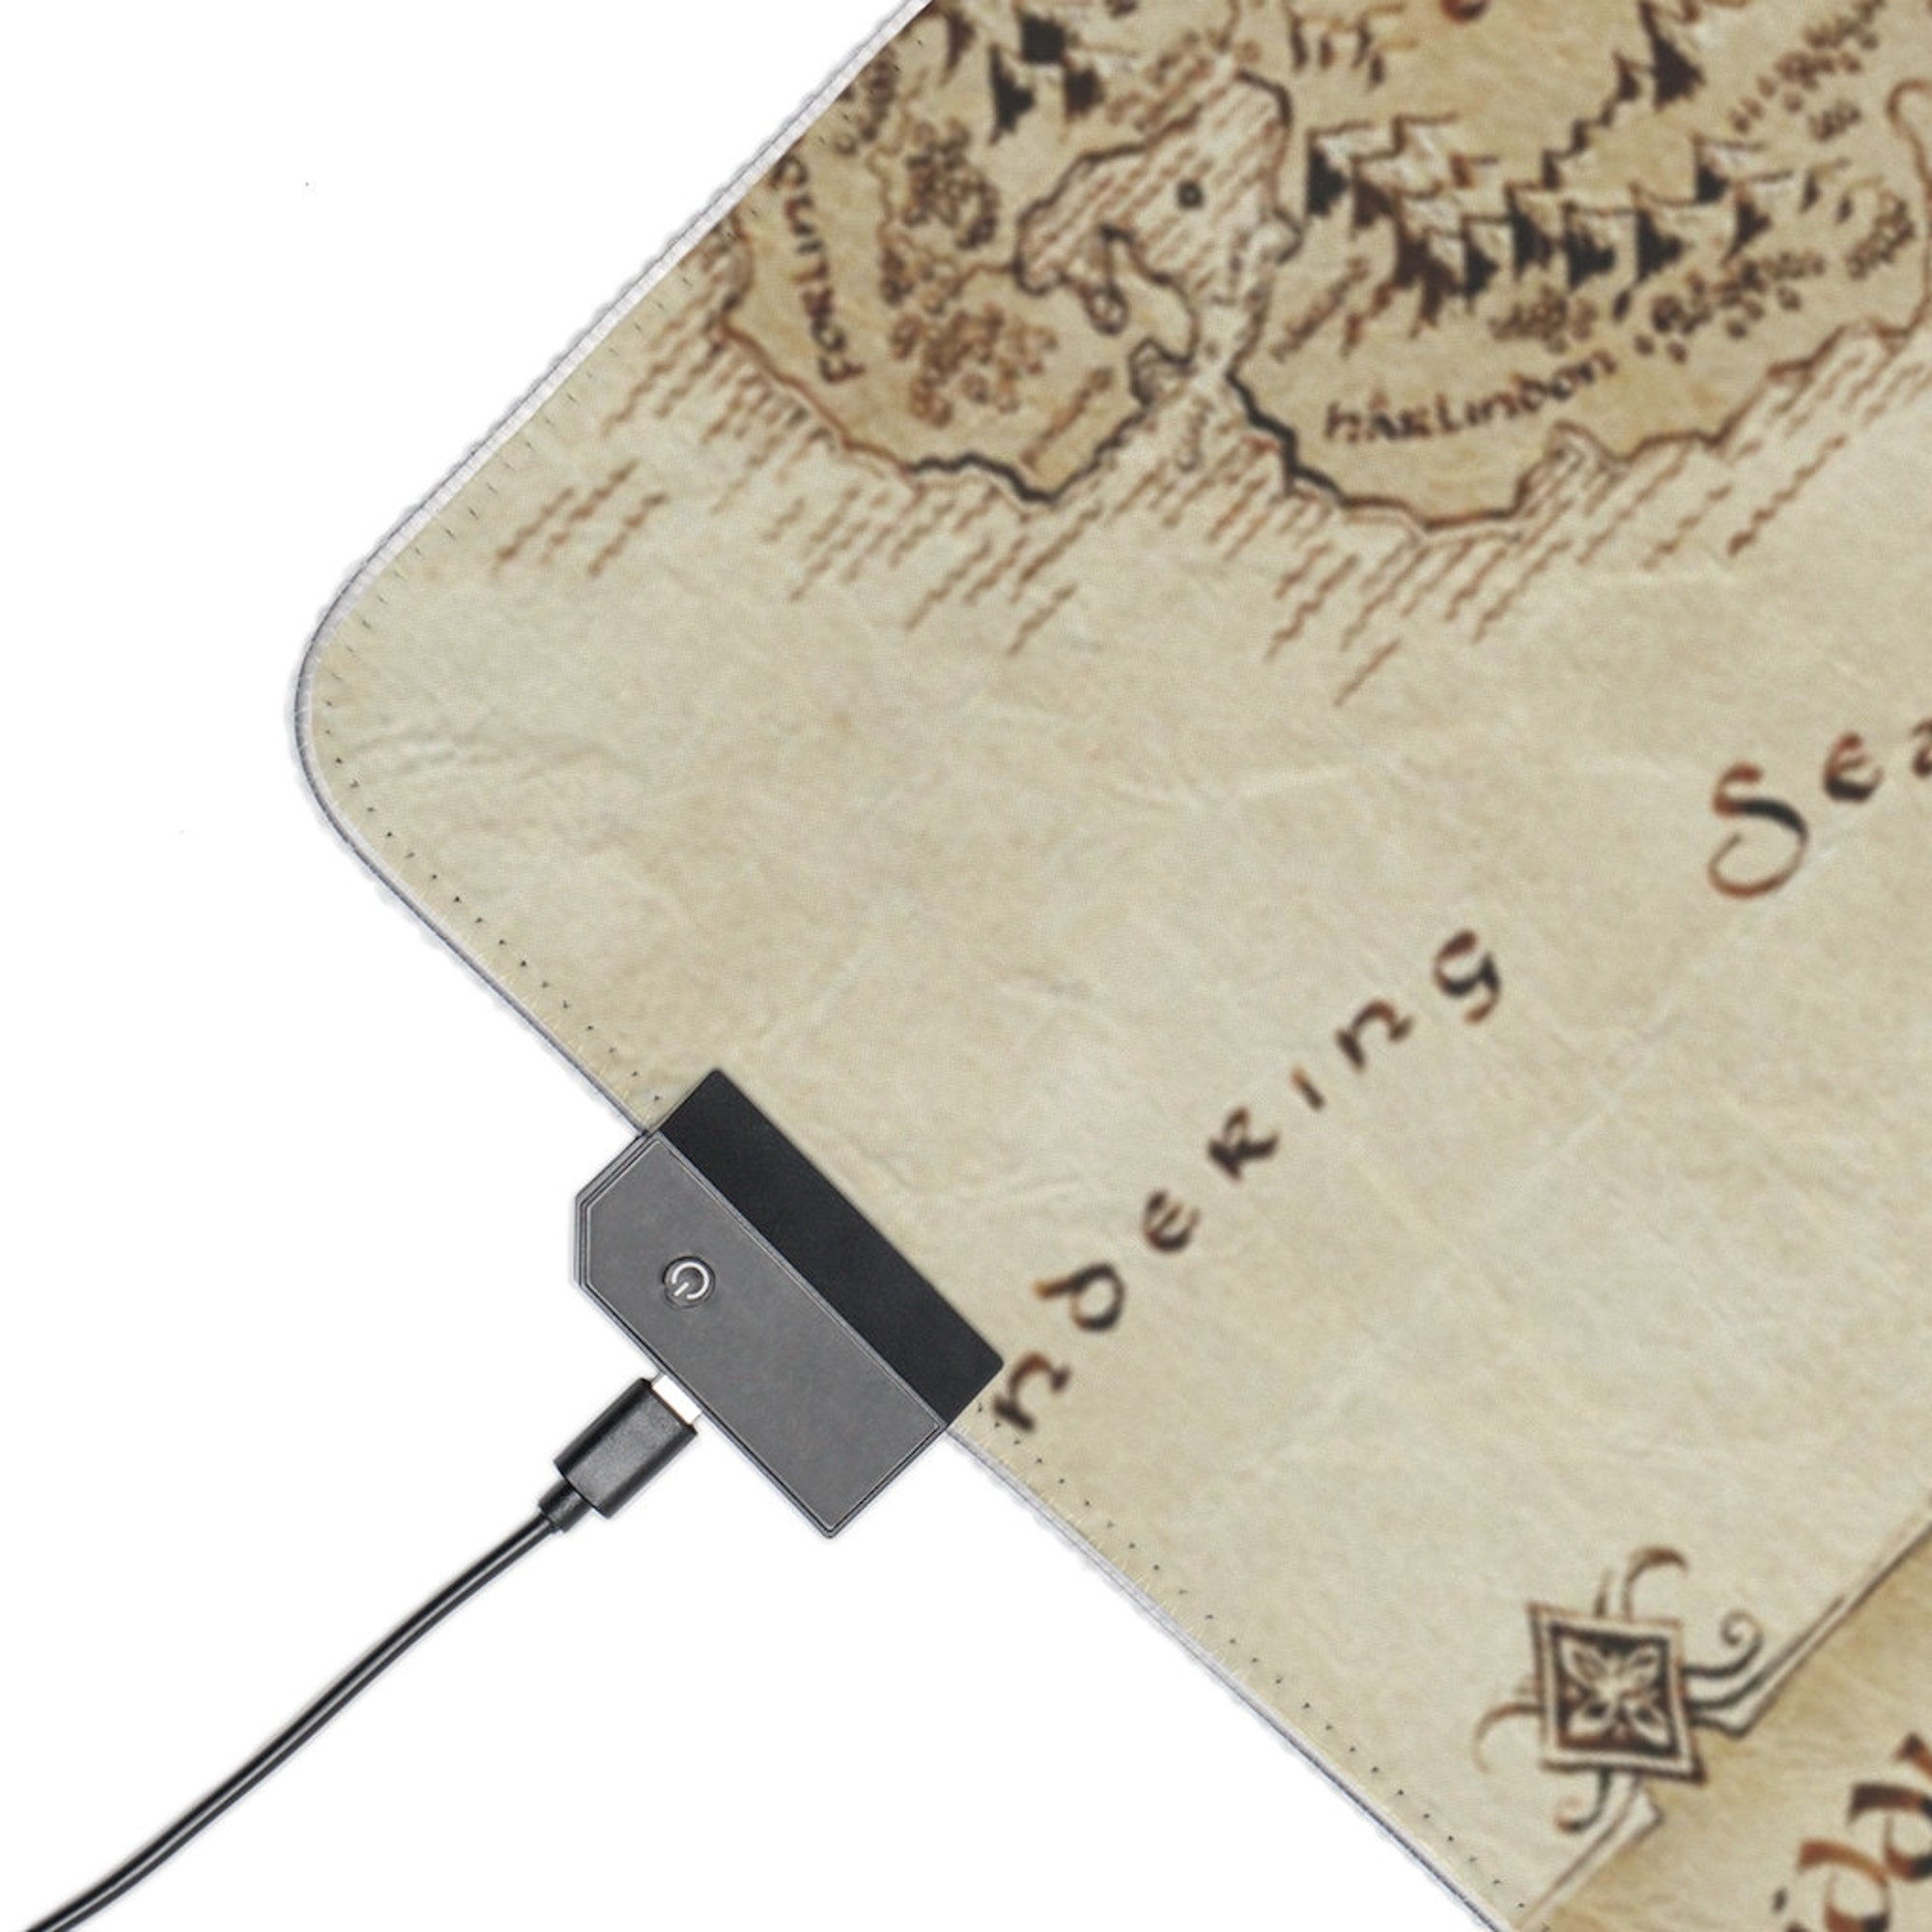 Discover LOTR - Middle Earth -  LED Gaming Mouse Pad